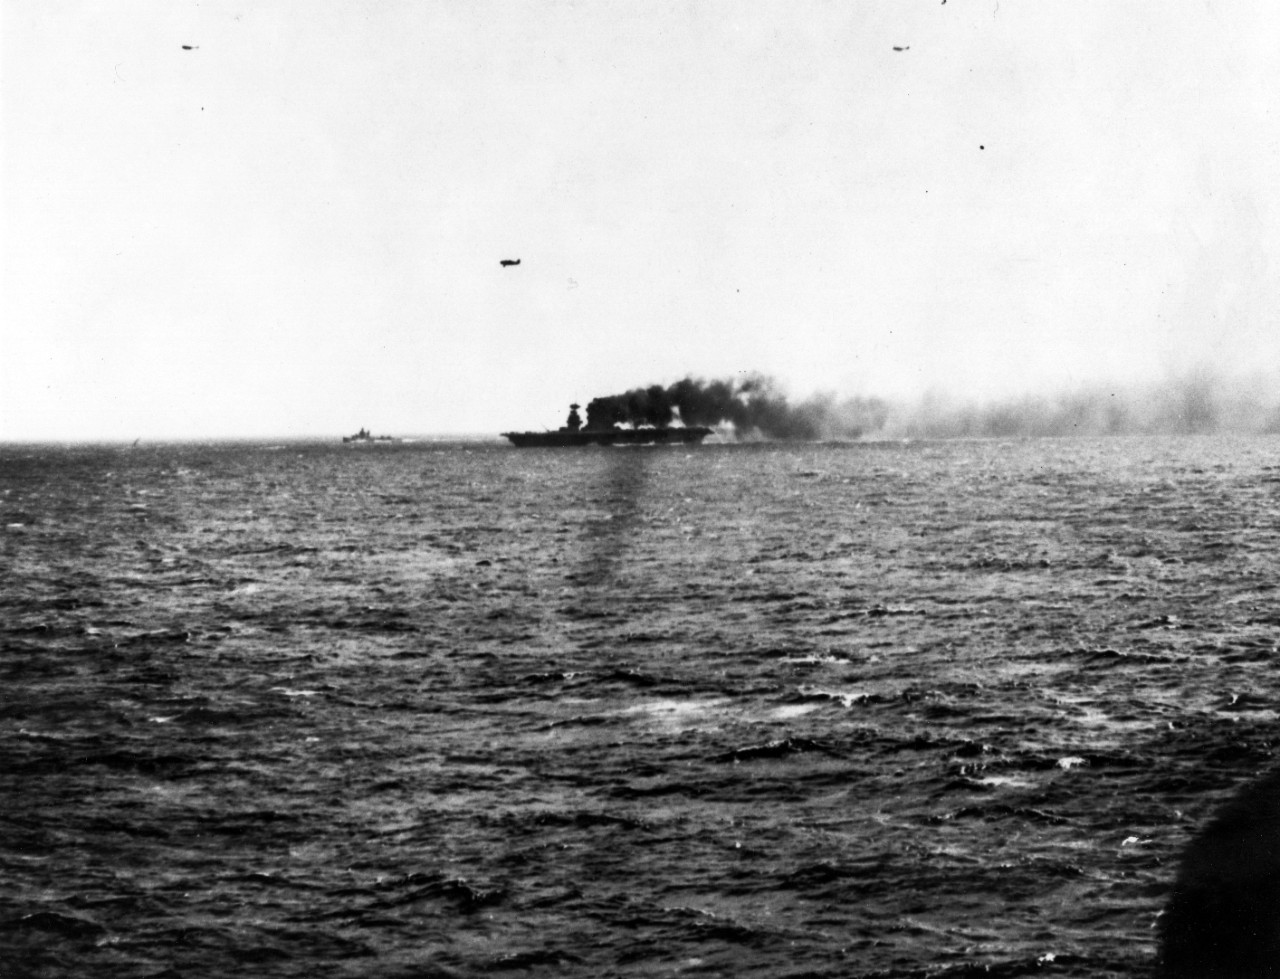 Photo #: 80-G-16643  Battle of the Coral Sea, May 1942